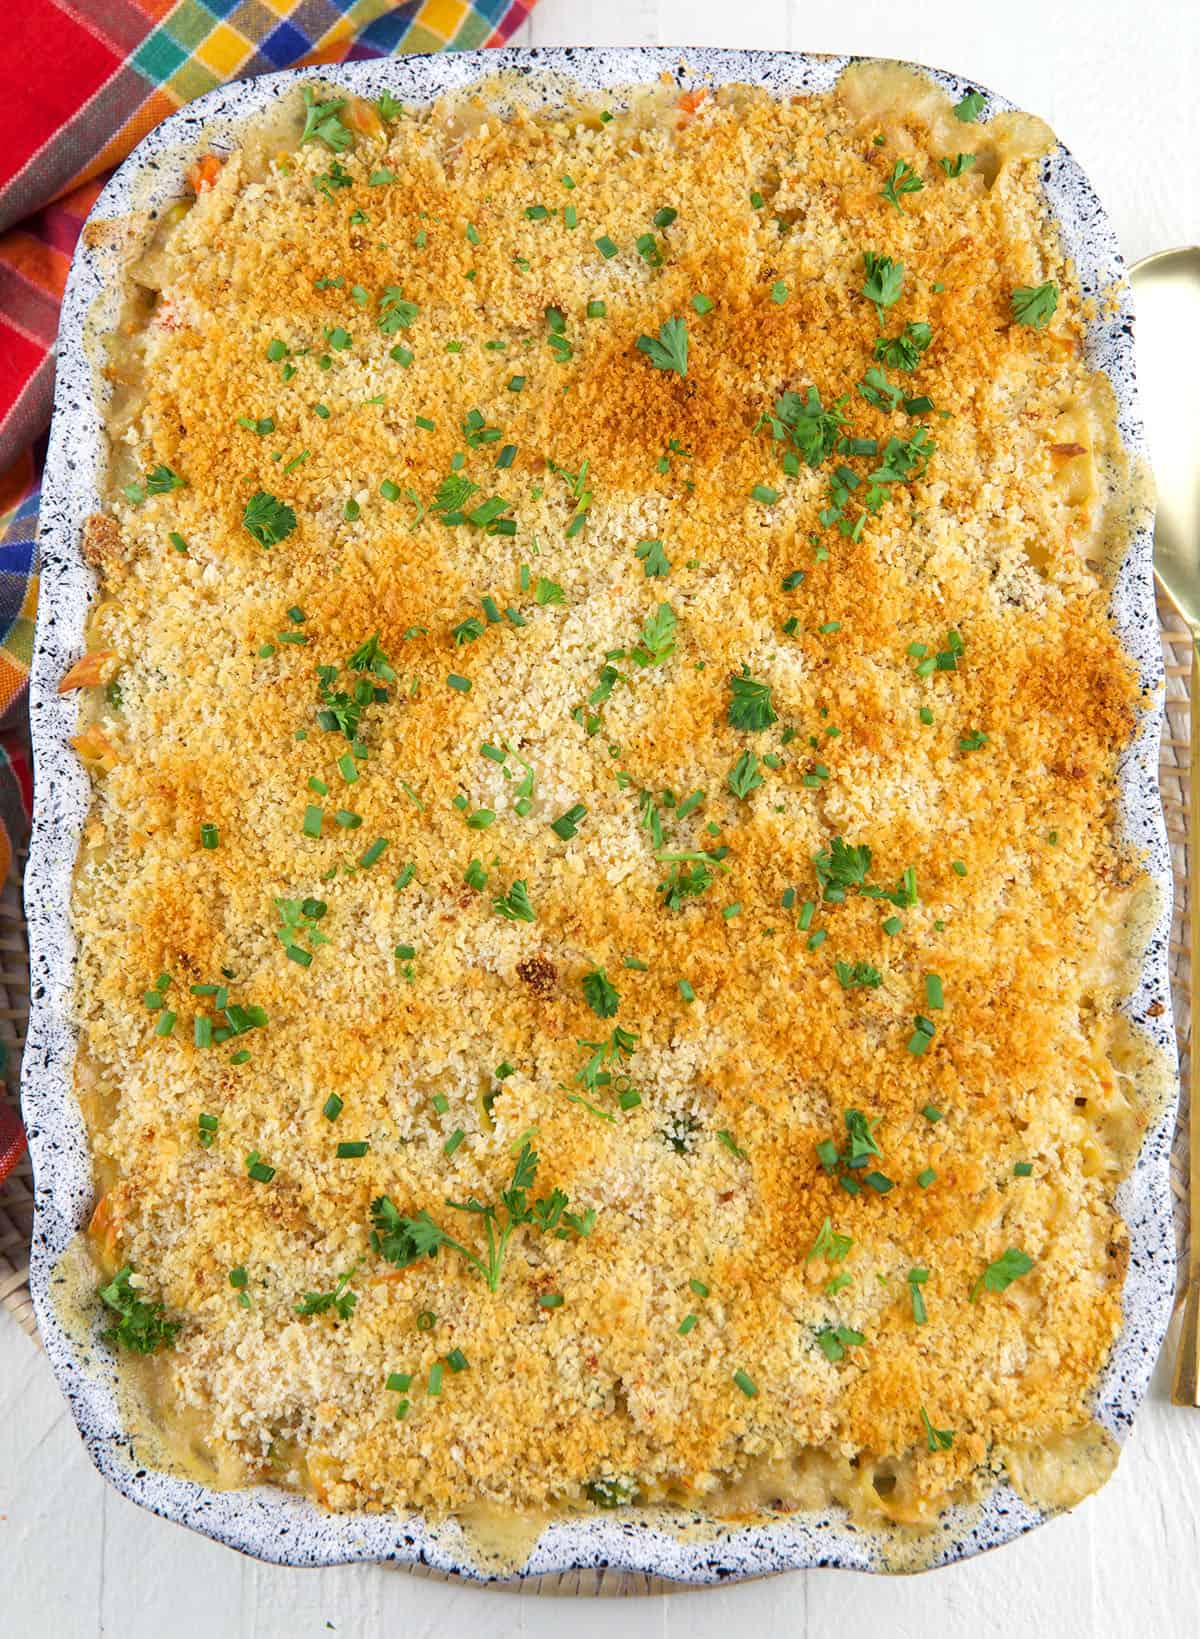 A casserole dish is filled with baked chicken noodle casserole.